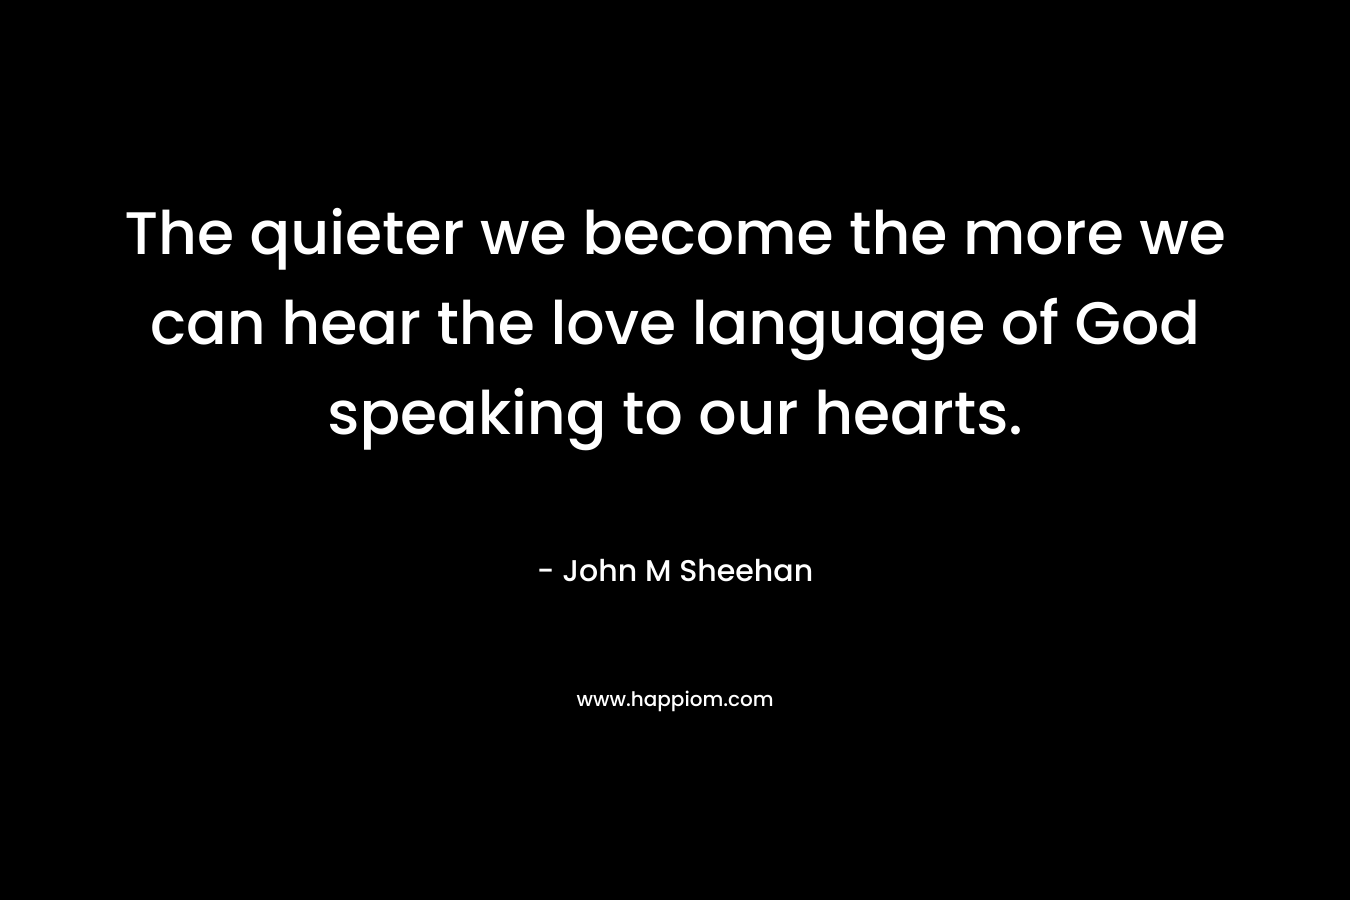 The quieter we become the more we can hear the love language of God speaking to our hearts. – John M Sheehan